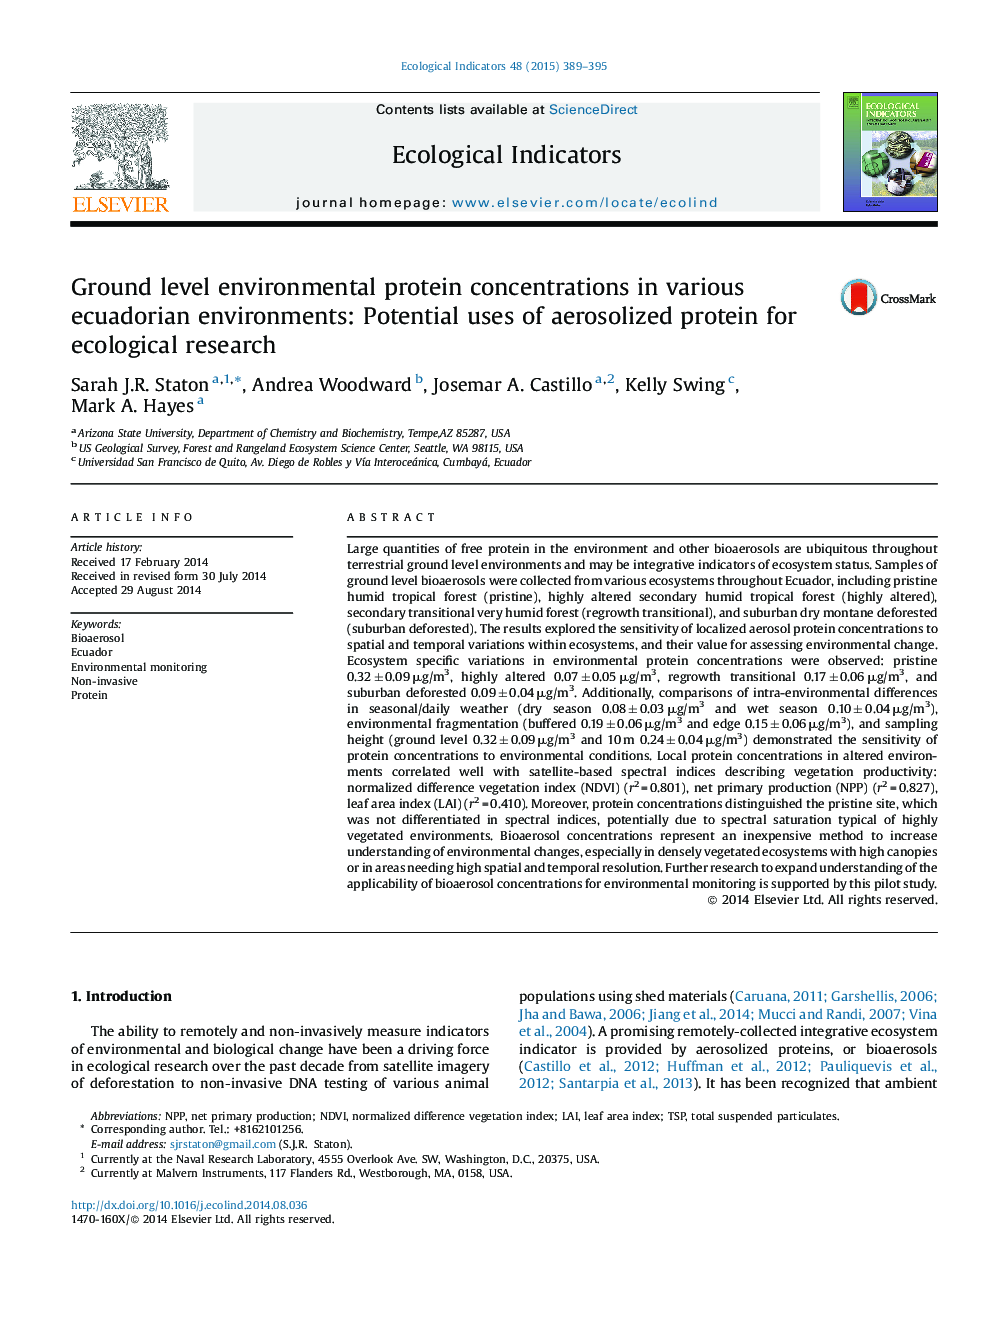 Ground level environmental protein concentrations in various ecuadorian environments: Potential uses of aerosolized protein for ecological research